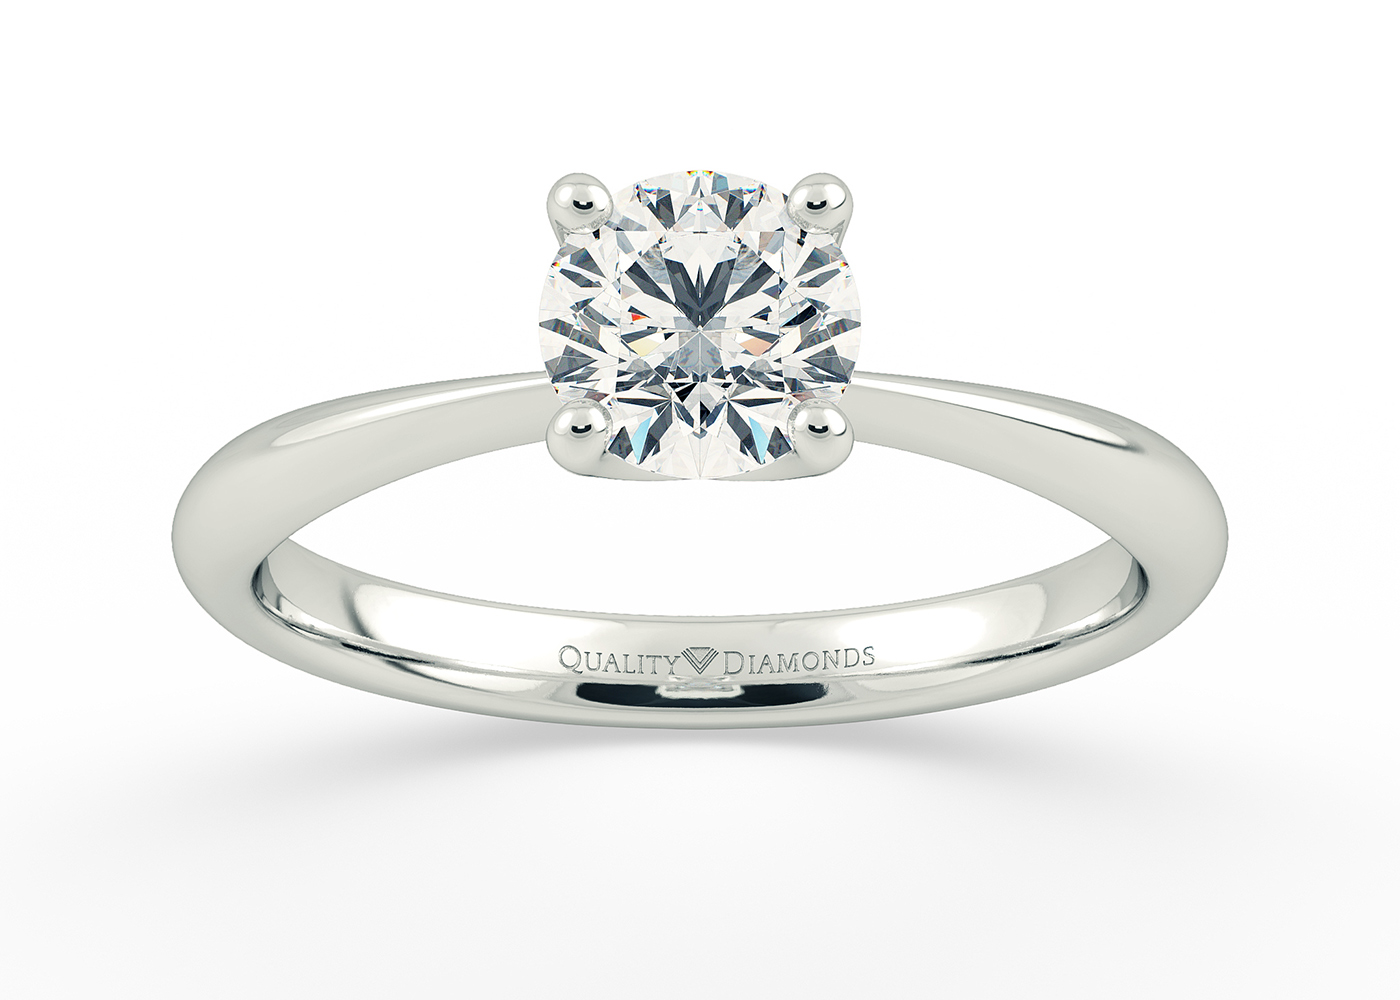 Two Carat Round Brilliant Solitaire Diamond Engagement Ring in 9K White Gold